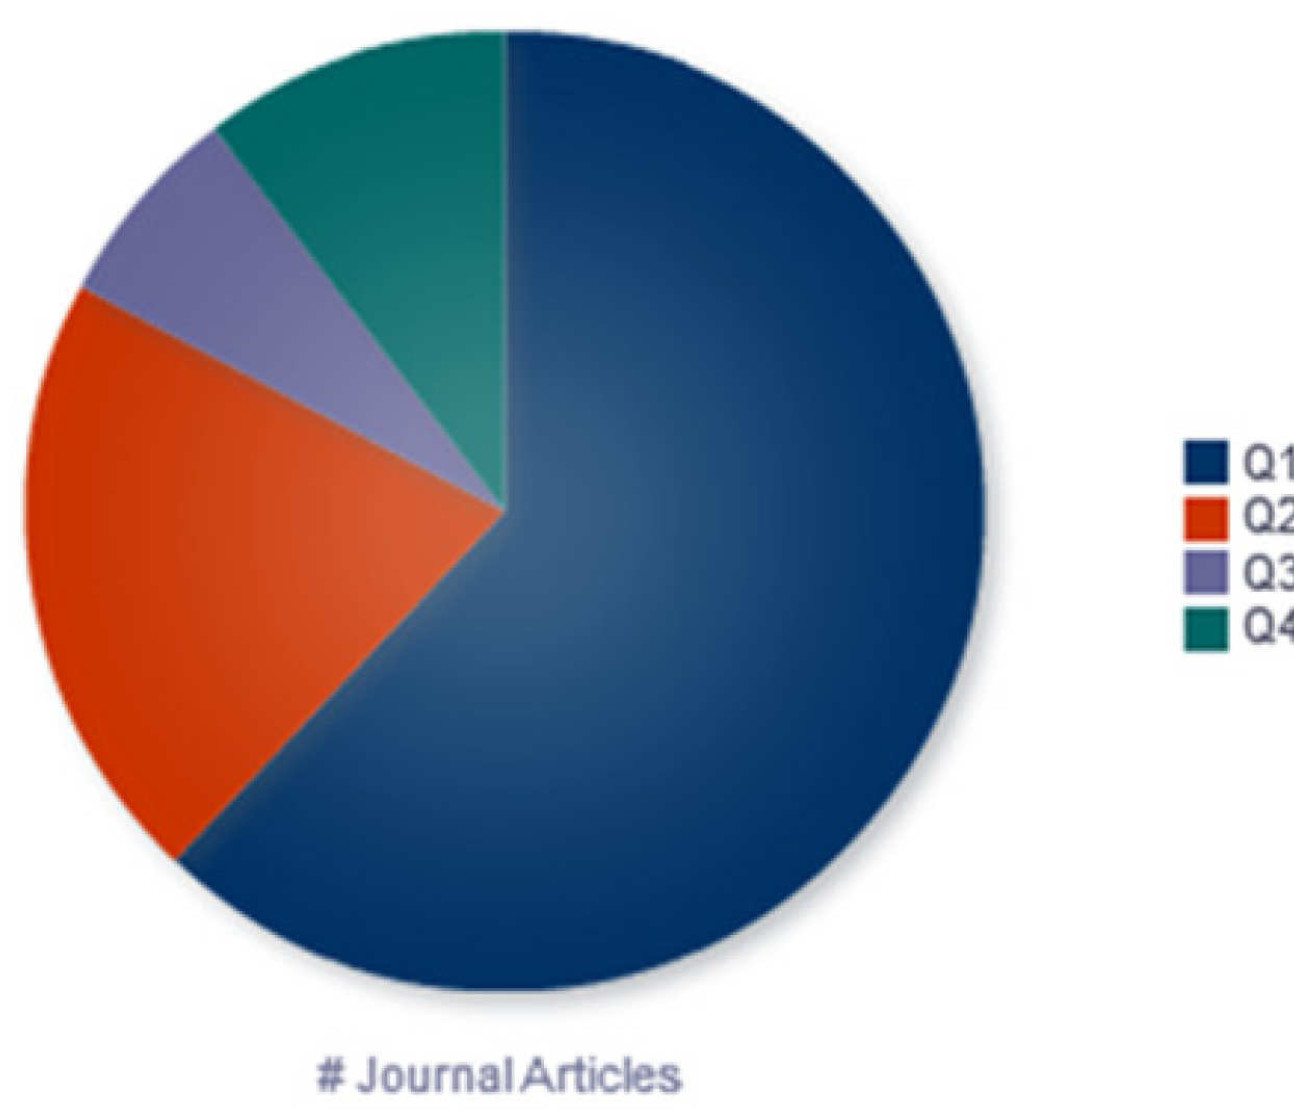 Pie chart showing outputs recently claimed by Journal Subject Category Quartile